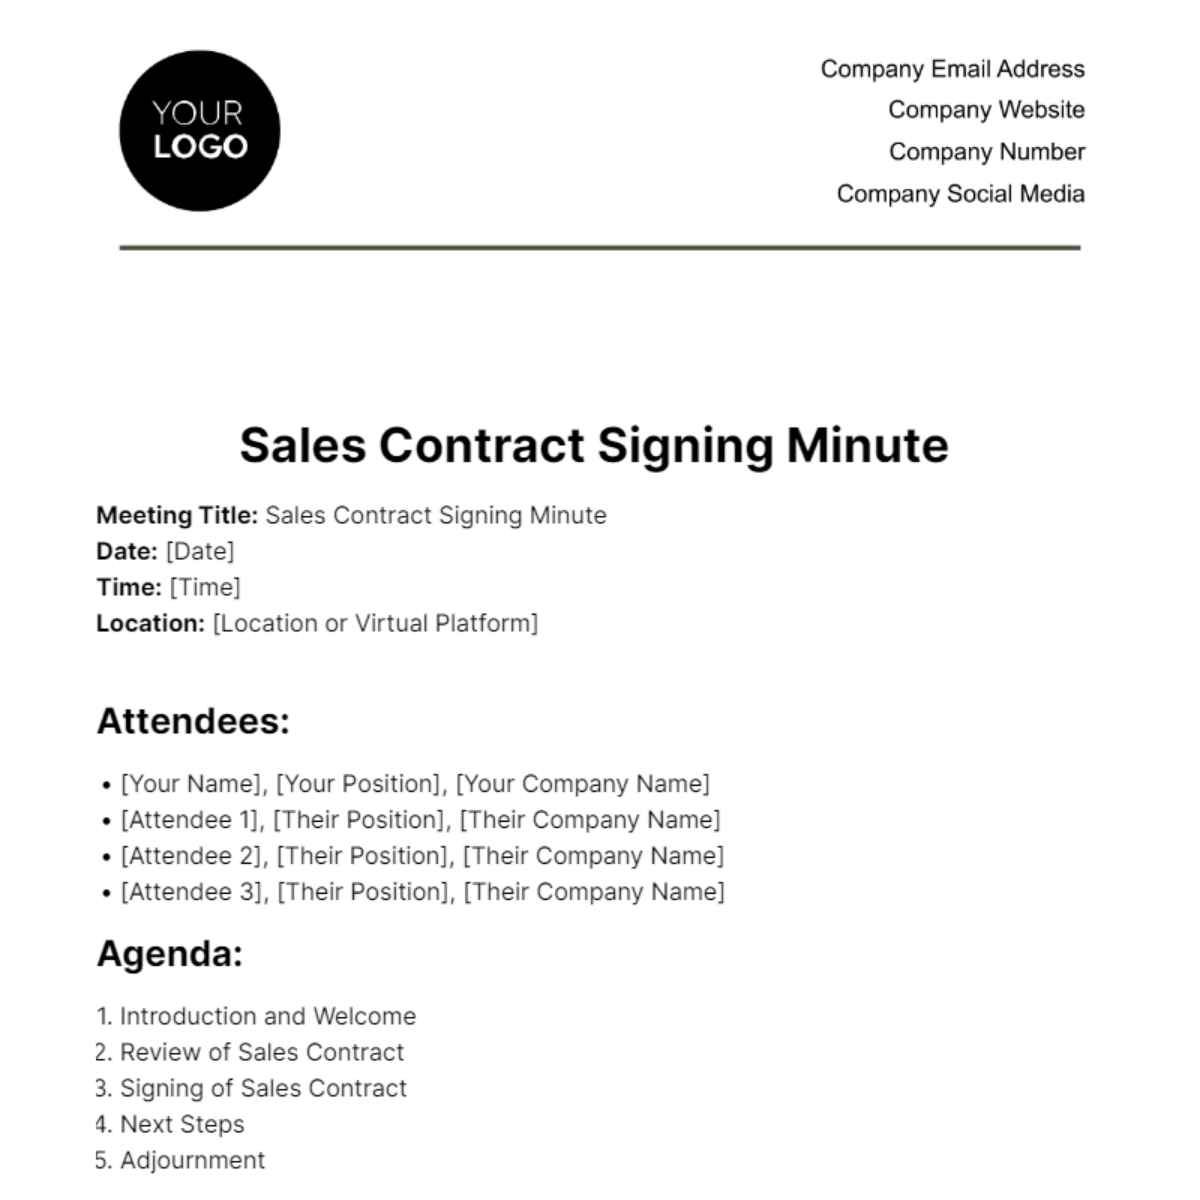 Free Sales Contract Signing Minute Template